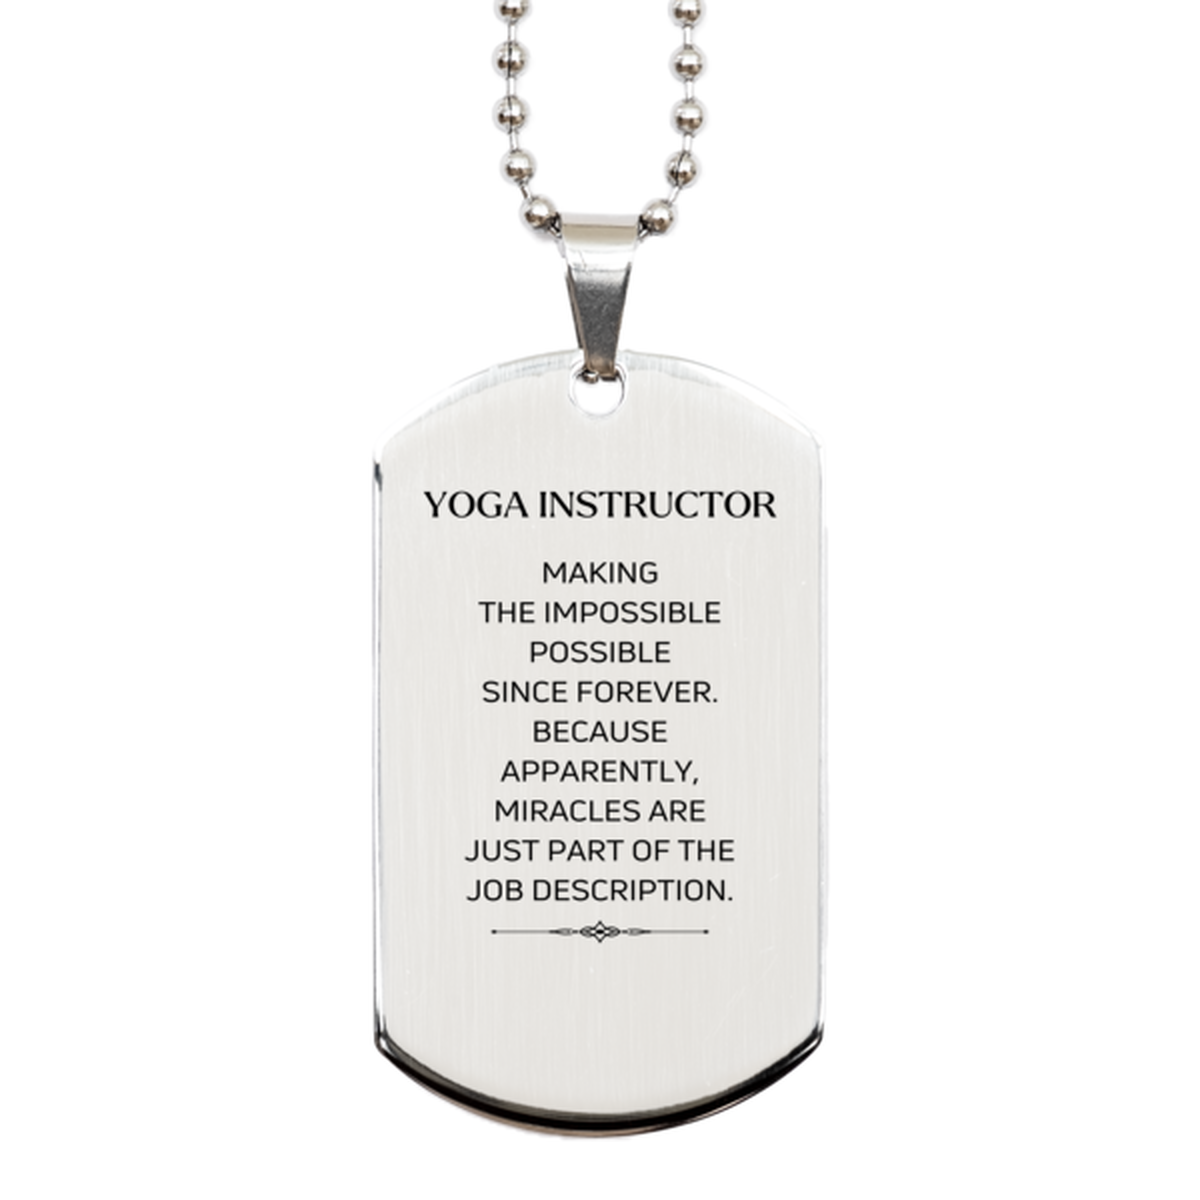 Funny Yoga Instructor Gifts, Miracles are just part of the job description, Inspirational Birthday Silver Dog Tag For Yoga Instructor, Men, Women, Coworkers, Friends, Boss